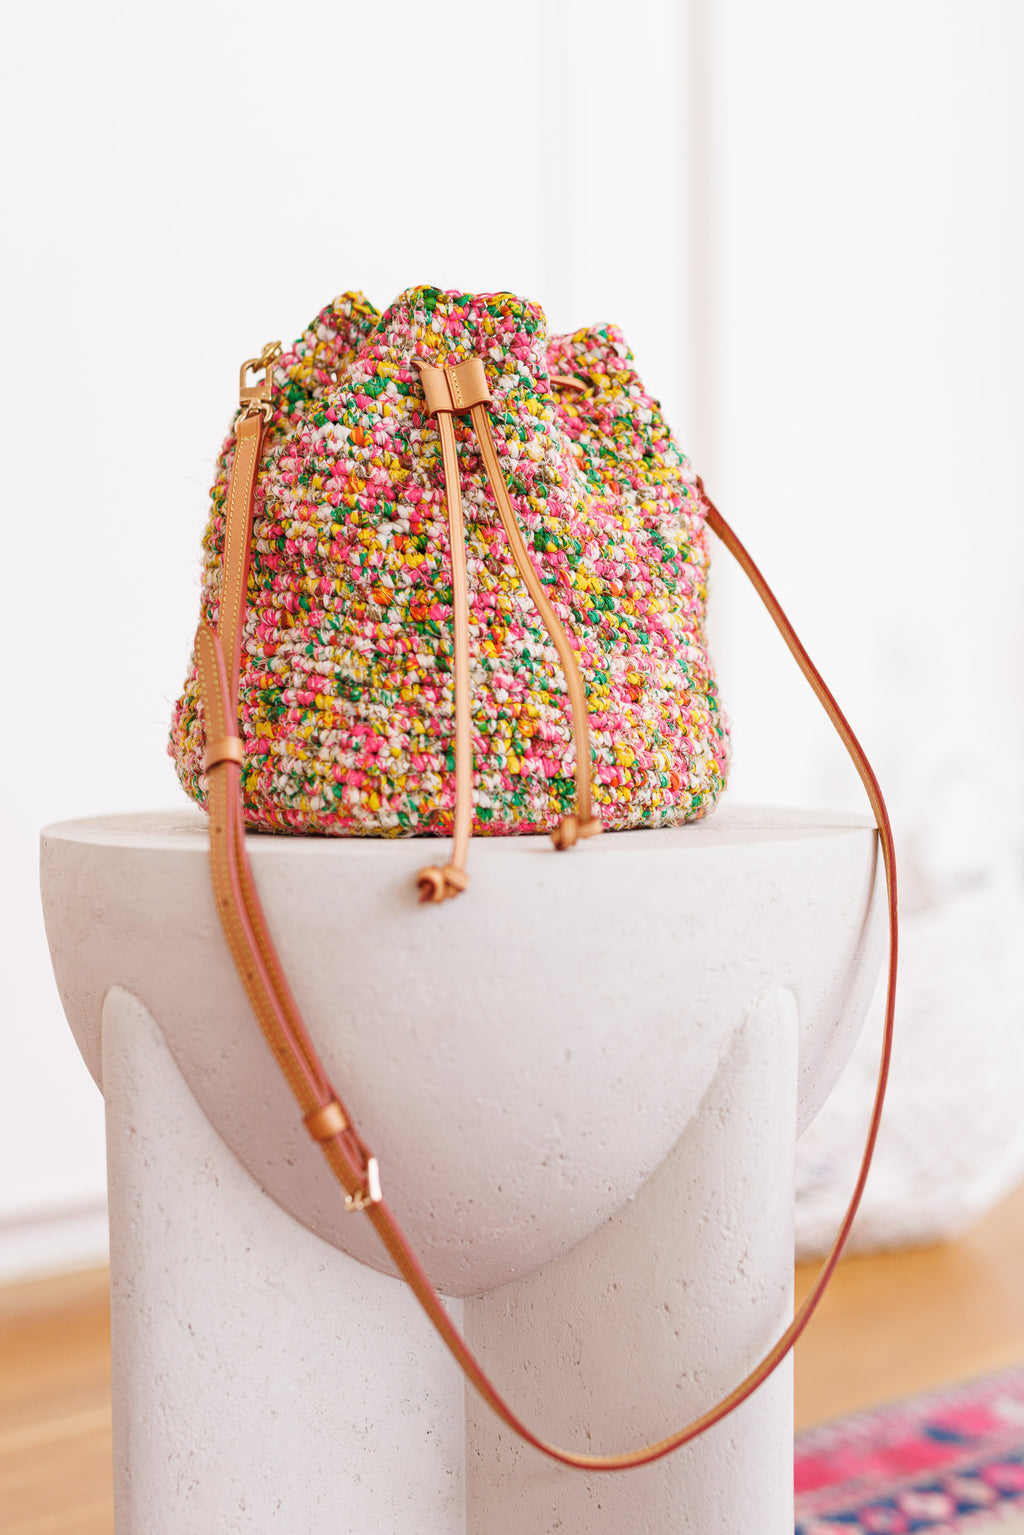 Traditional Albanian Bag Completely Handmade Knitted Multicolor Yellow